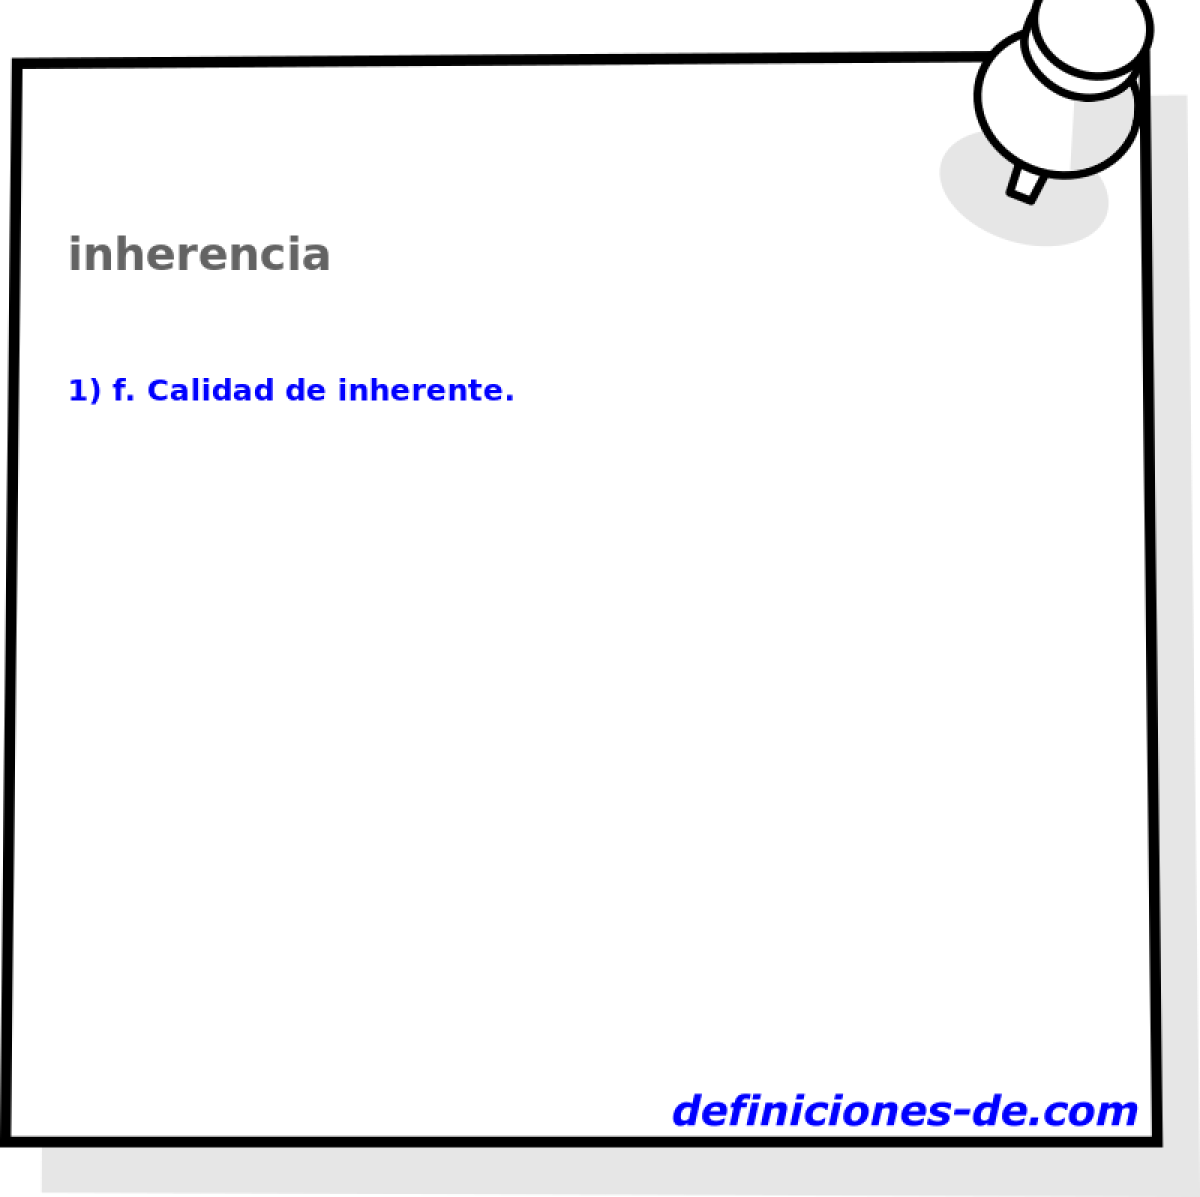 inherencia 